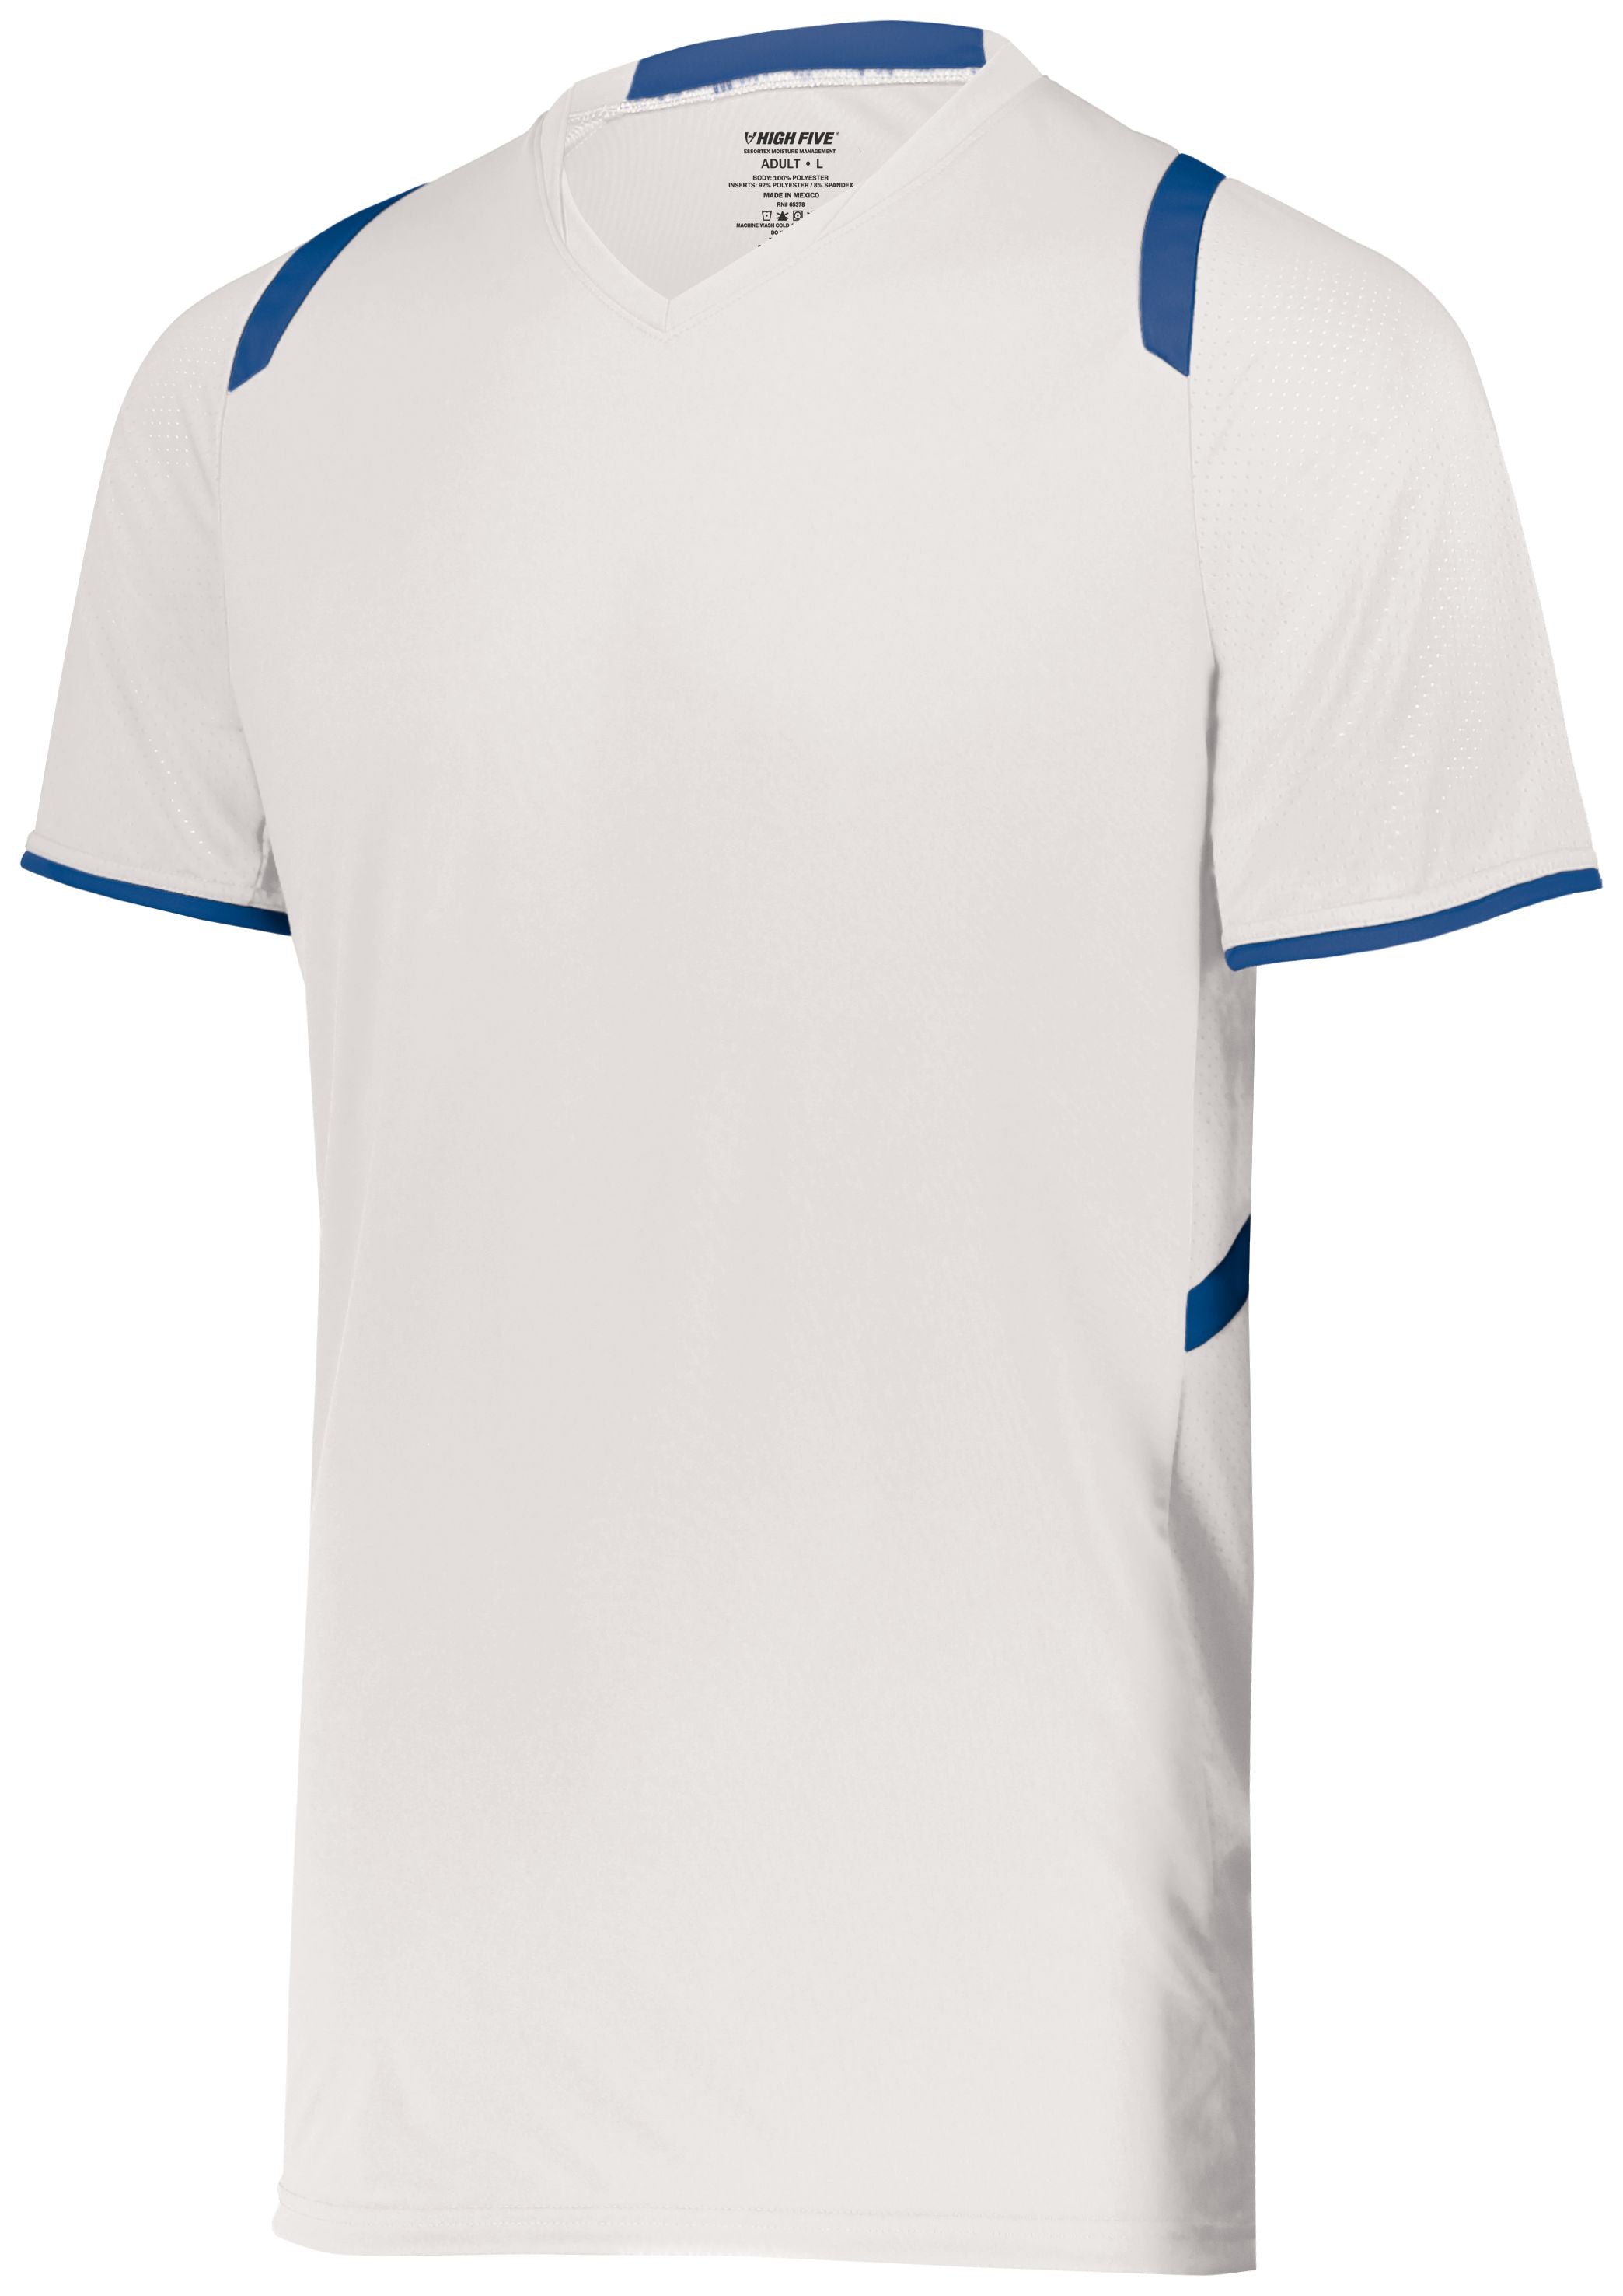 High 5 Youth Millennium Soccer Jersey in White/Royal  -Part of the Youth, Youth-Jersey, High5-Products, Soccer, Shirts, All-Sports-1 product lines at KanaleyCreations.com